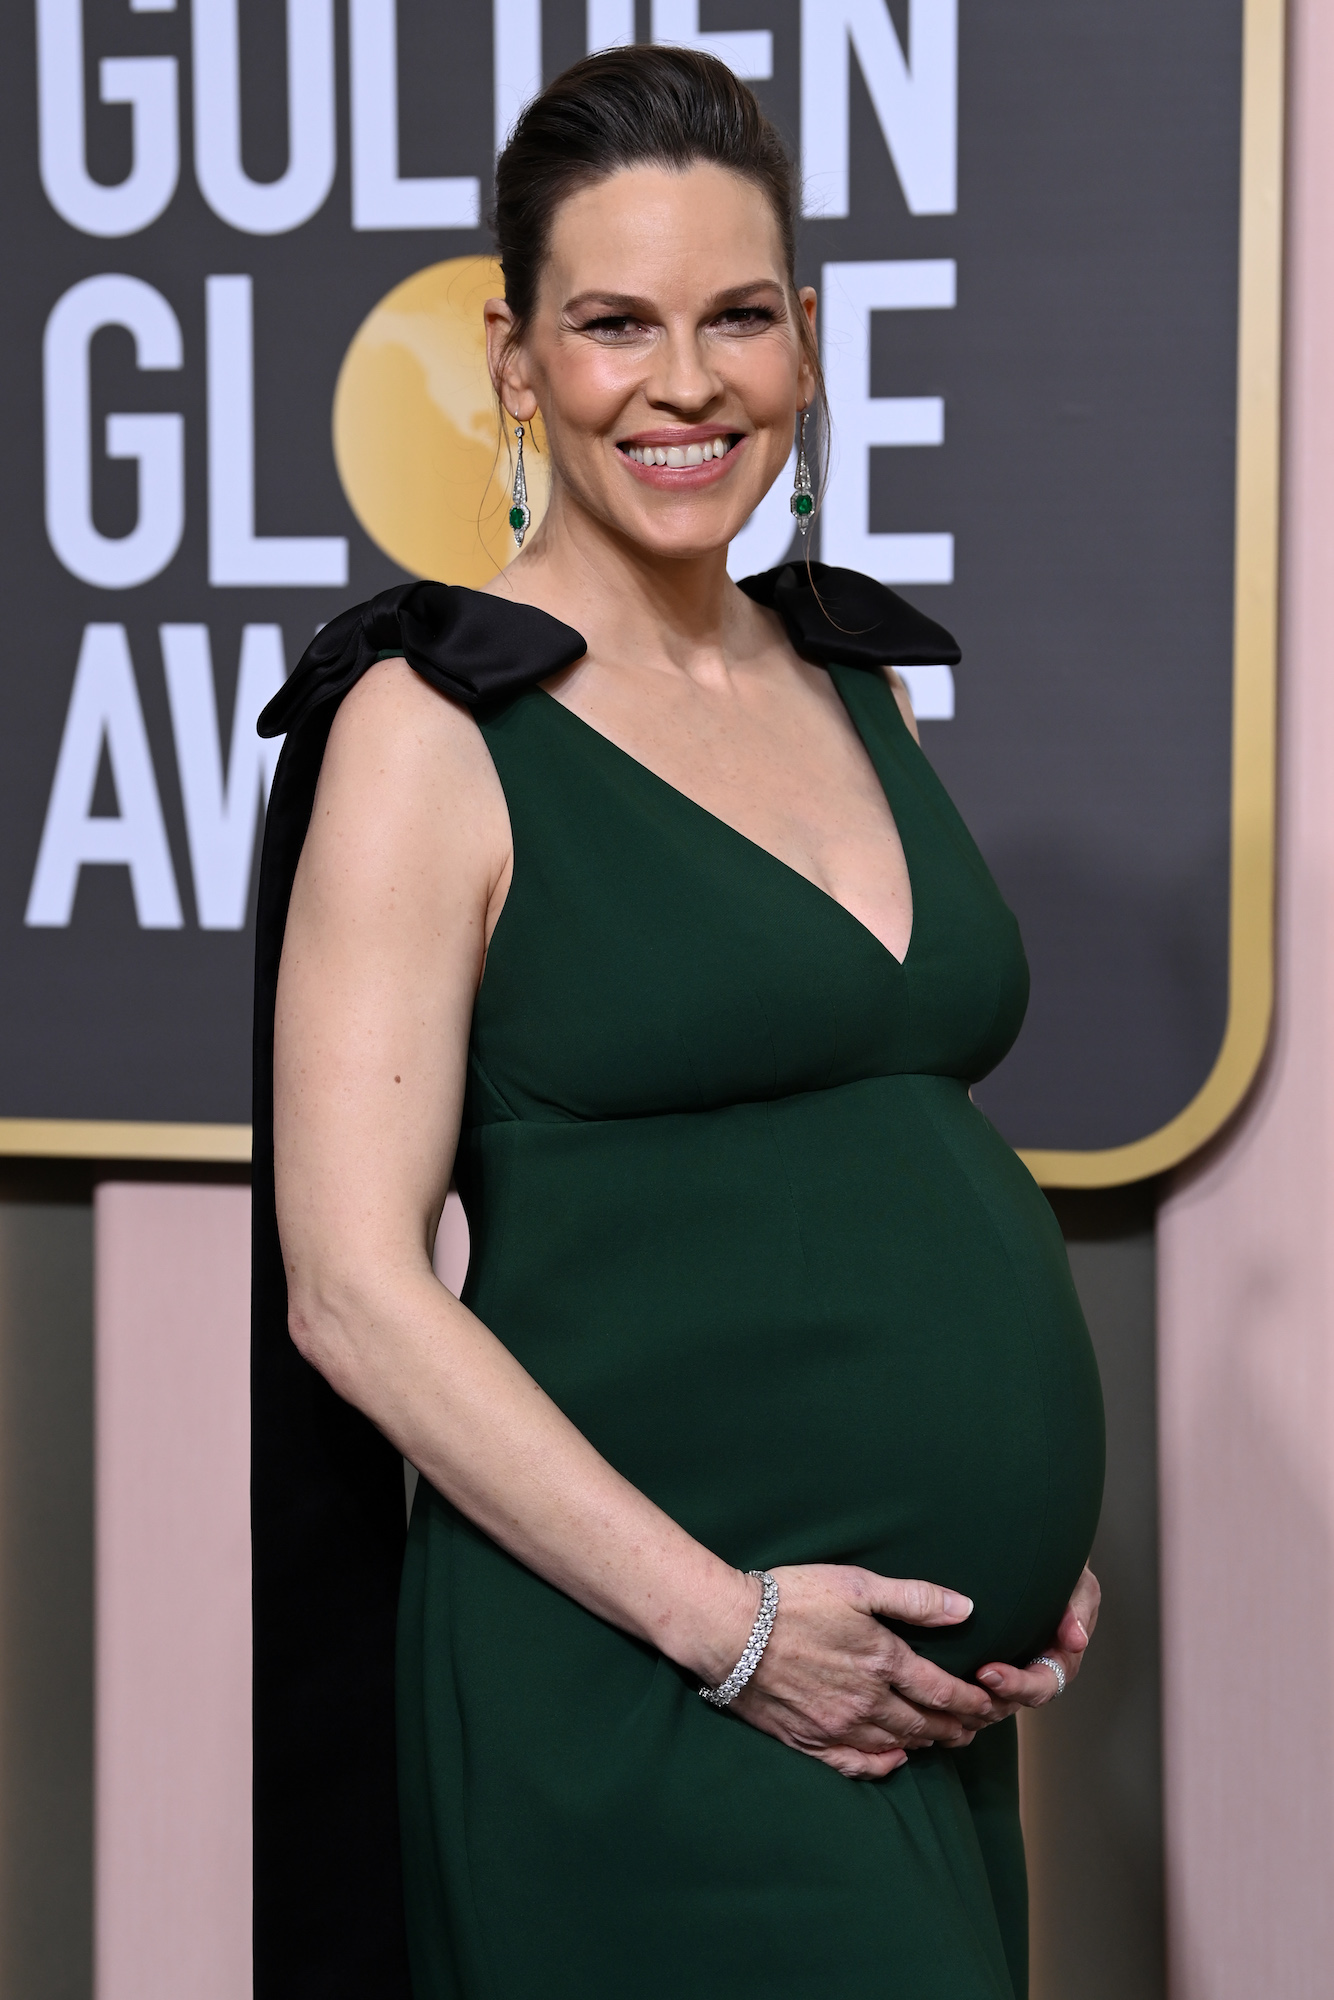 https://www.usmagazine.com/wp-content/uploads/2023/03/Hilary-Swank-Is-Excited-Beyond-Her-Wildest-Dreams-Over-Twin-Pregnancy-She-Feels-Ready-to-Focus-on-Motherhood.jpg?quality=86&strip=all